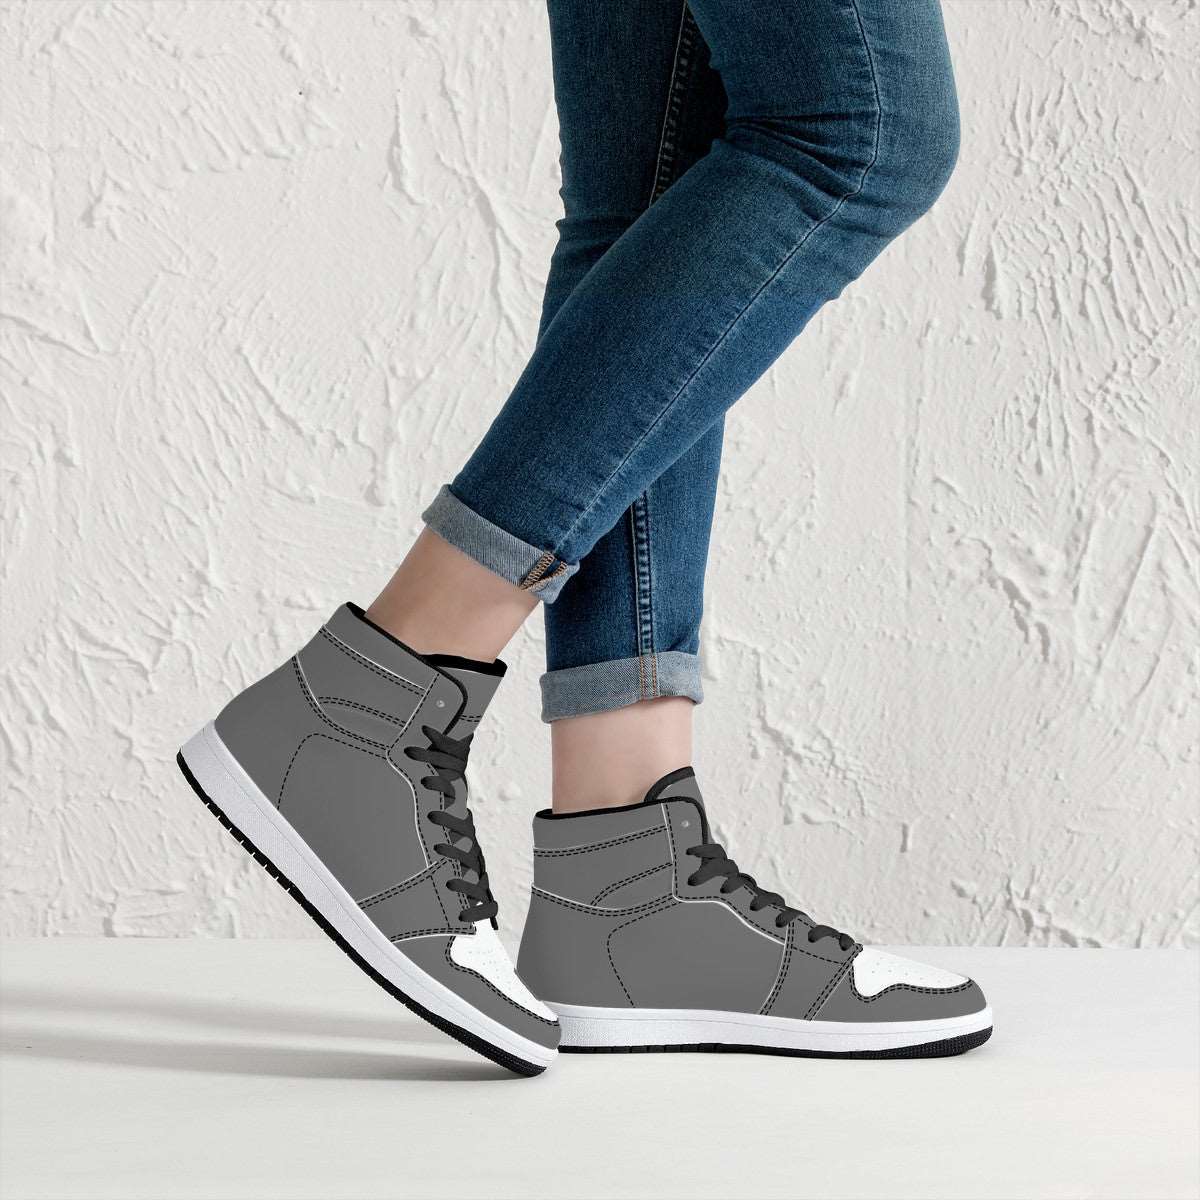 Create Your Own - High Top Synthetic Leather Sneakers - Black - HayGoodies